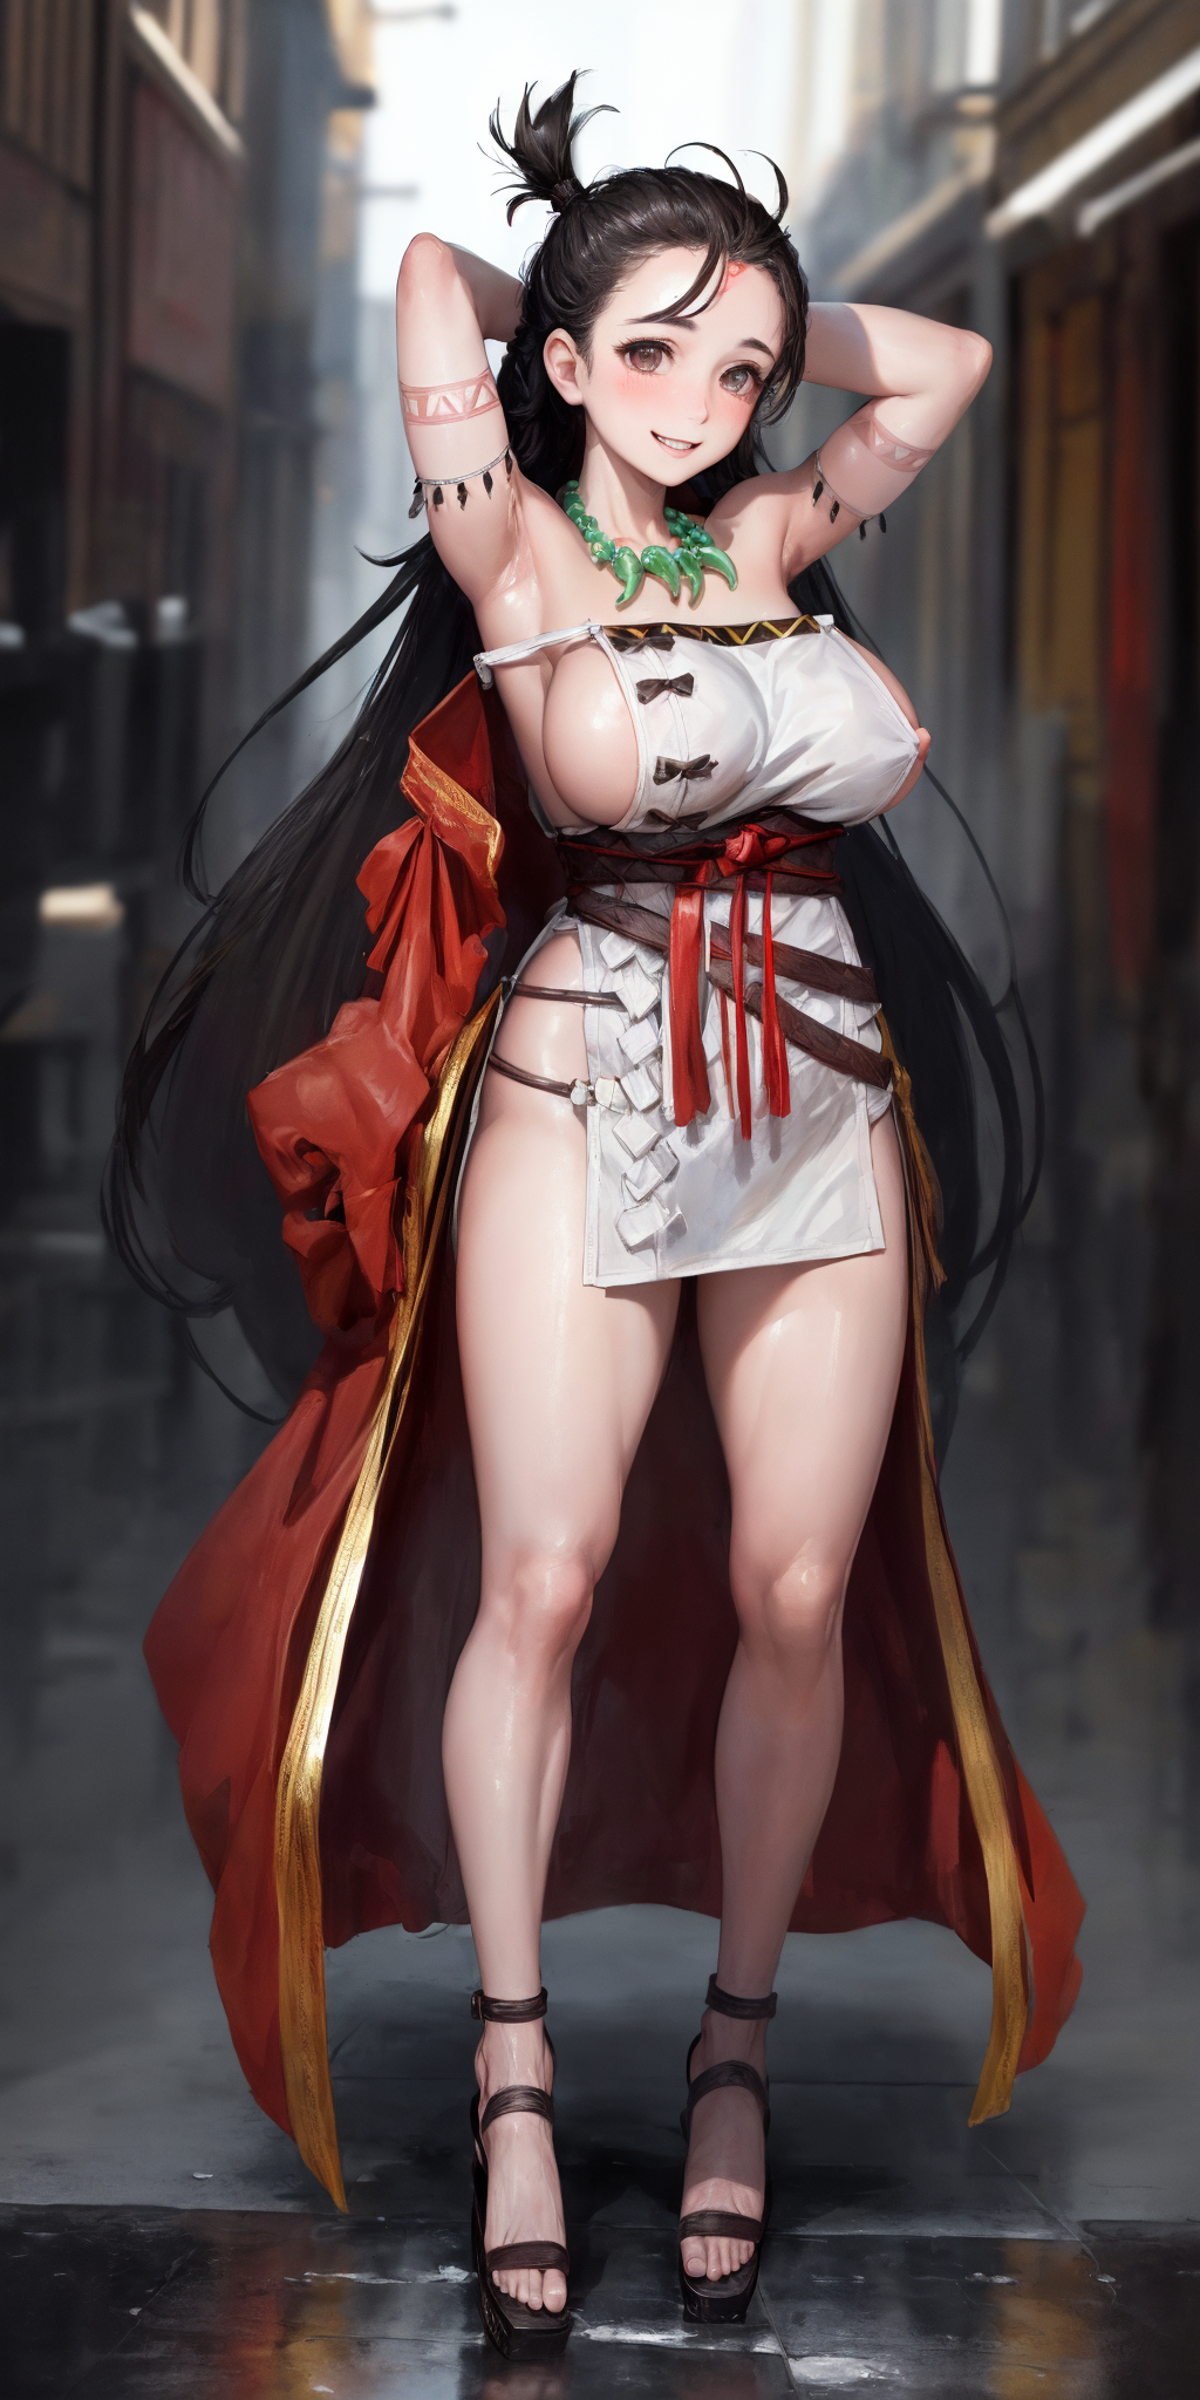 Himiko (Fgo) 3 stages image by Daeart